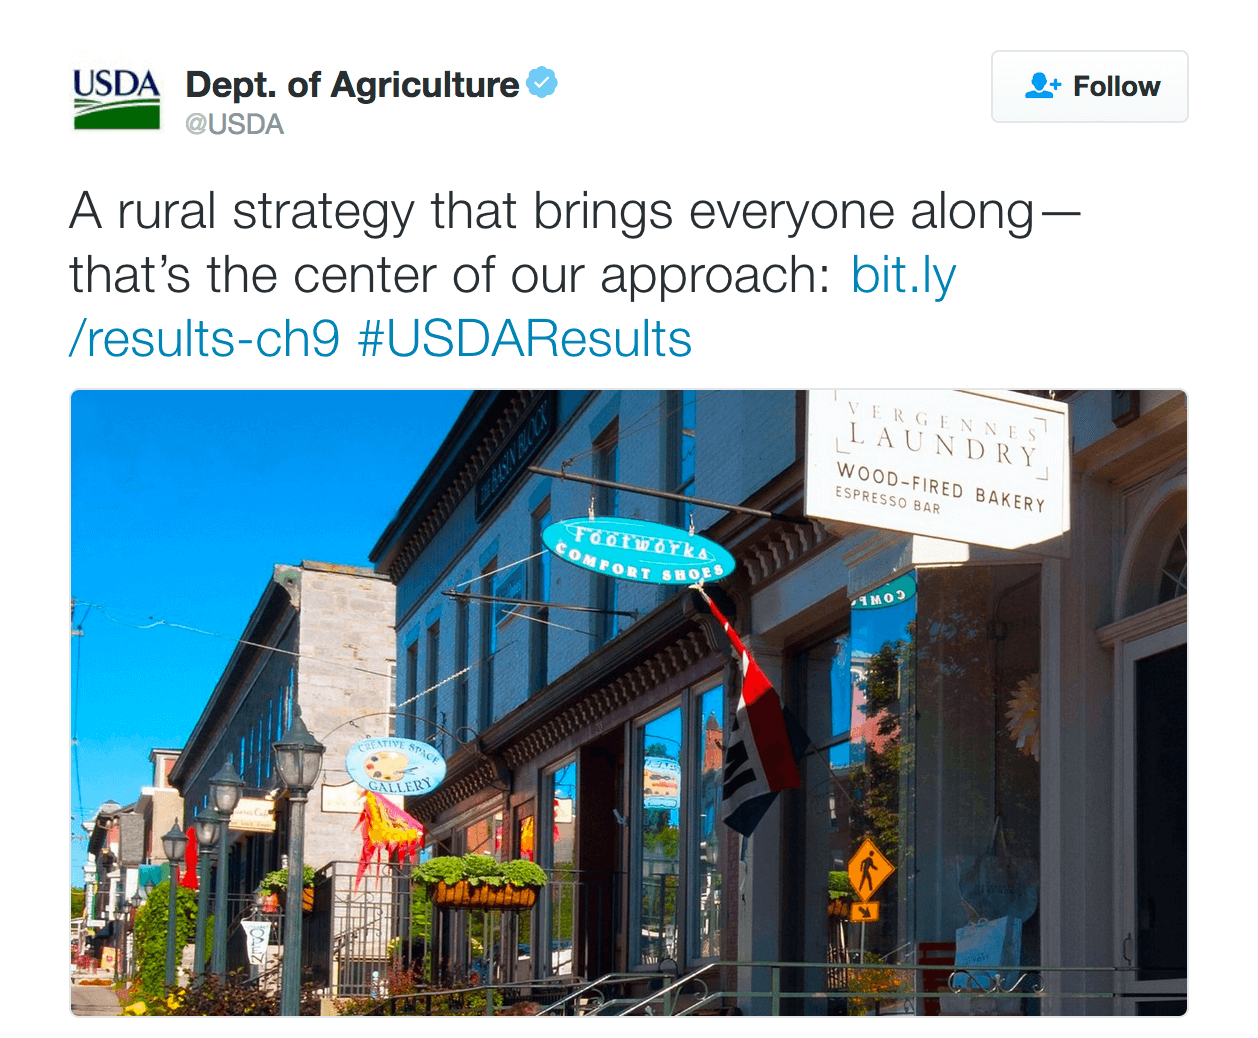  rural strategy that brings everyone along—that’s the center of our approach: http://bit.ly/results-ch9  #USDAResults